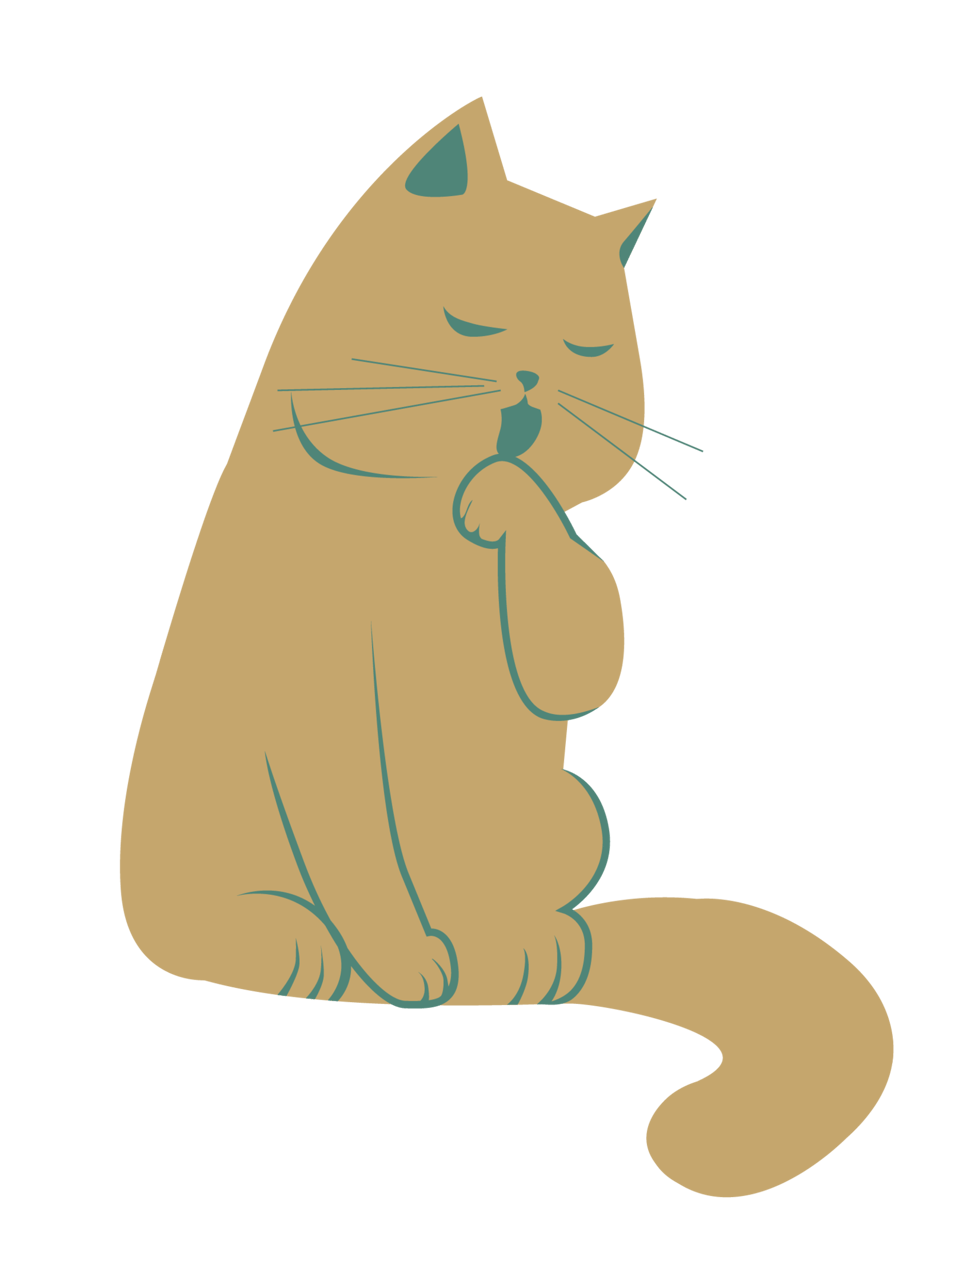 Small to medium-sized cats, Cat, Felidae, Carnivore, Gesture, Whiskers